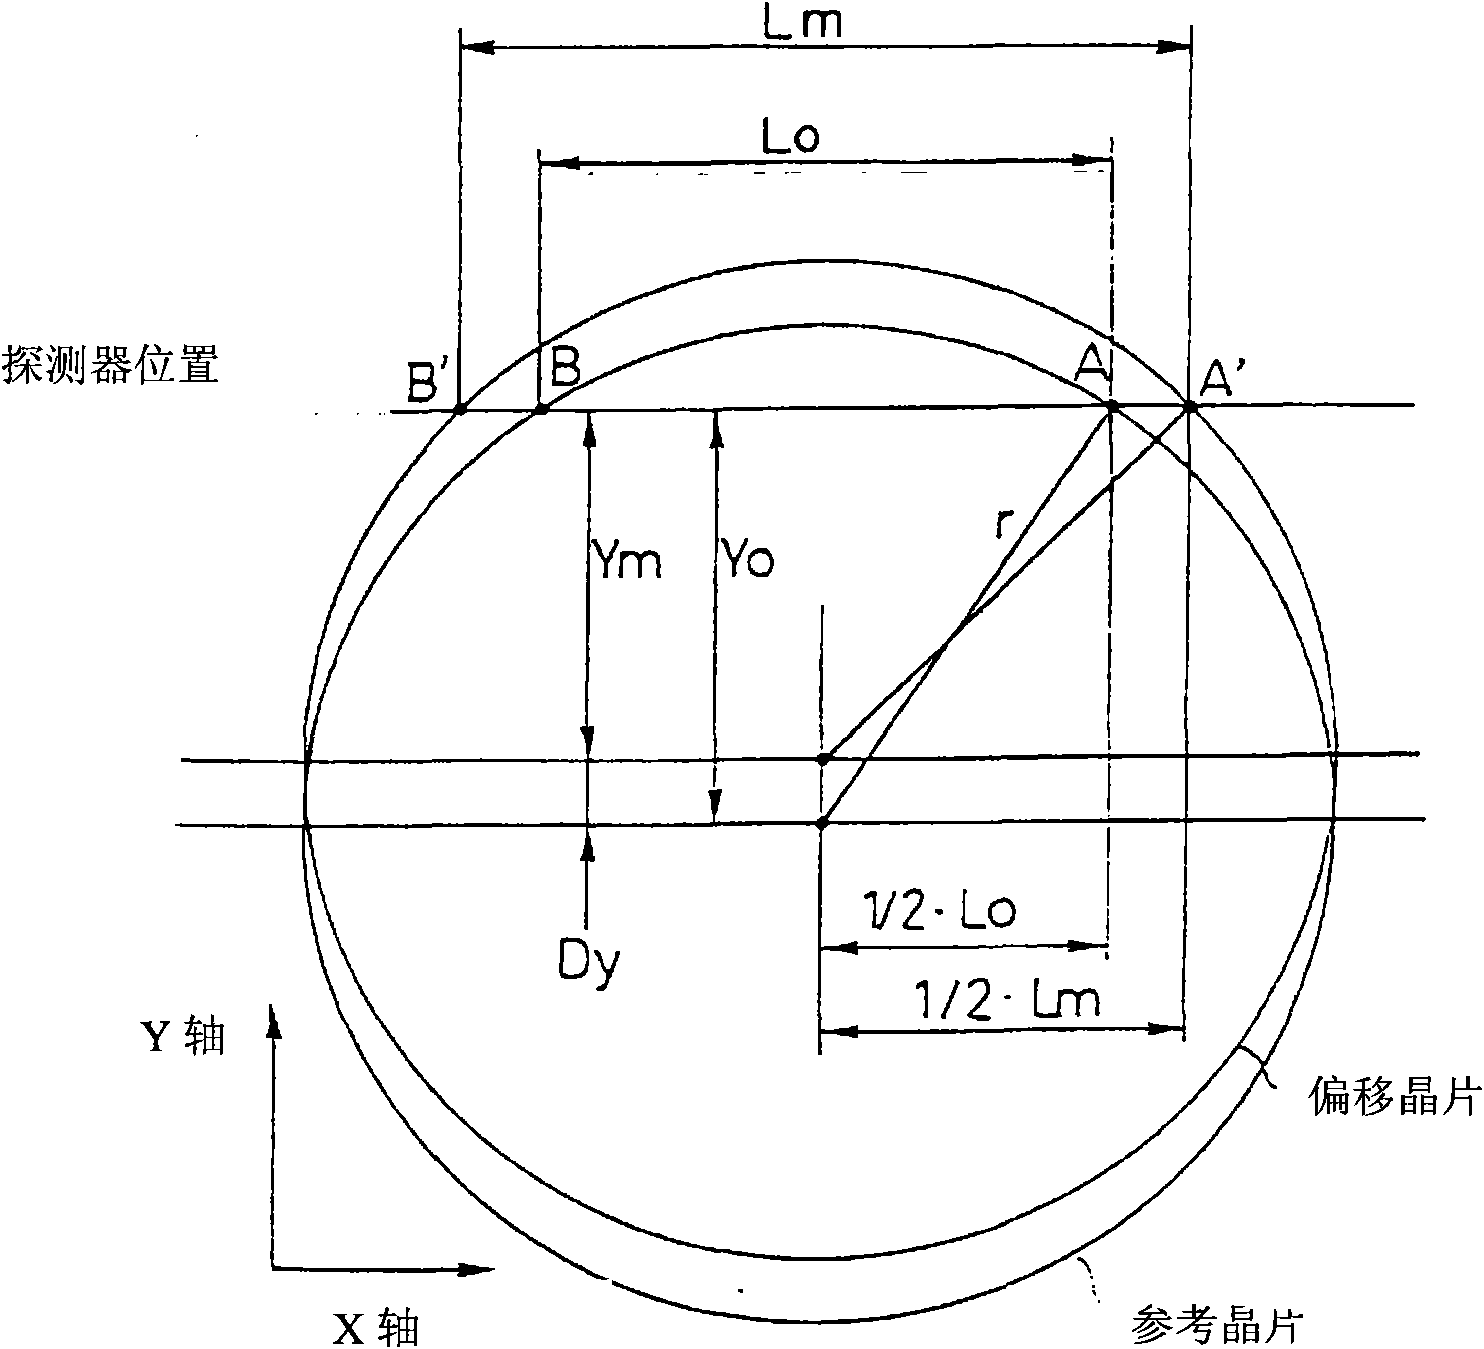 Method for detecting offset position of wafer